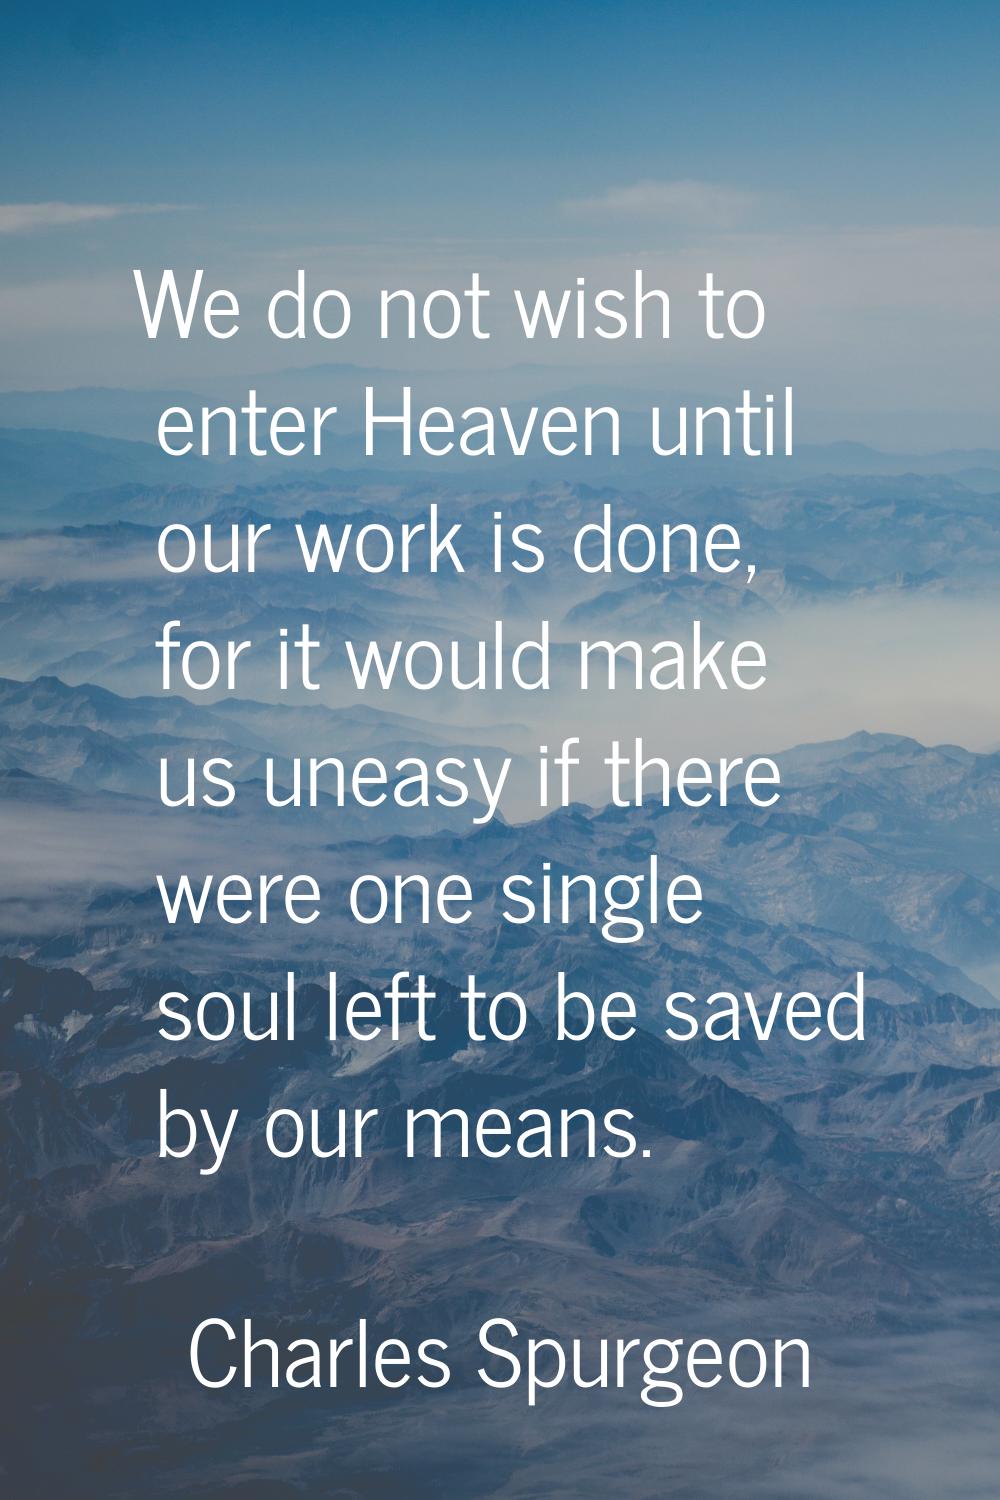 We do not wish to enter Heaven until our work is done, for it would make us uneasy if there were on